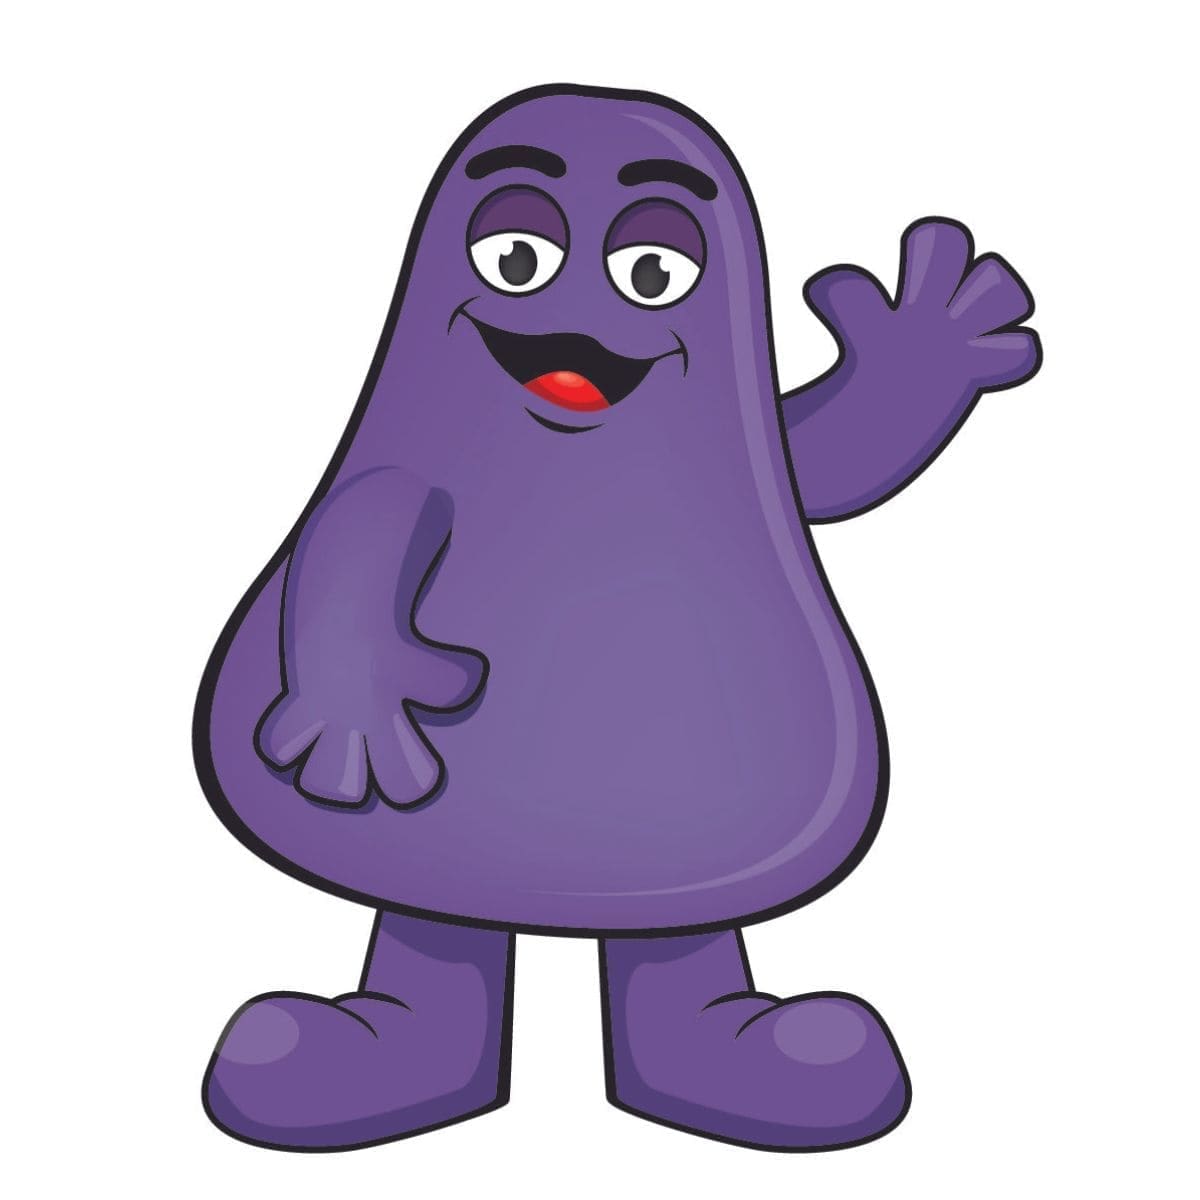 A close-up photo of a McDonald's Grimace plush toy sitting on a white background.